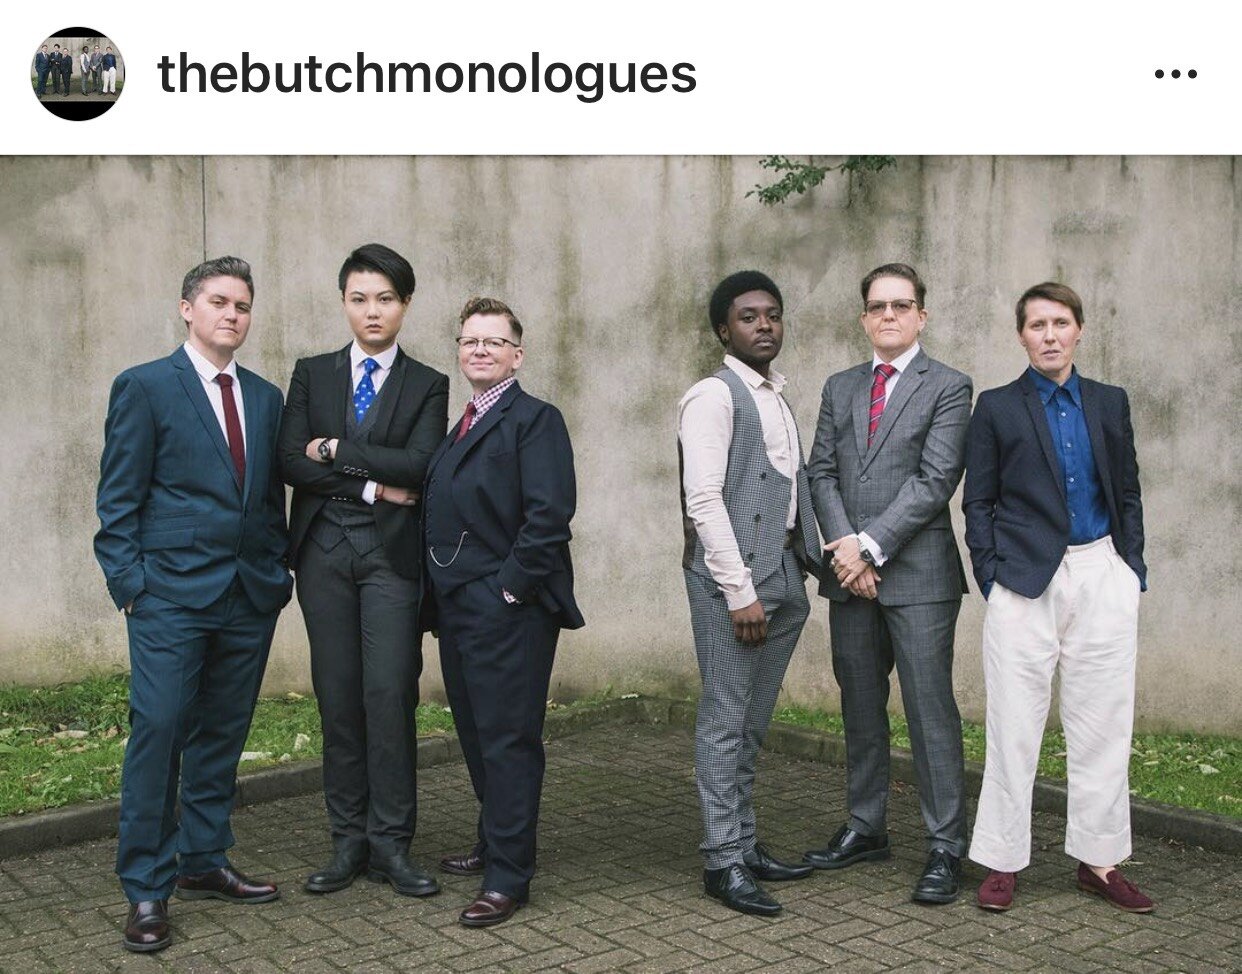 Follow the show on Insta @thebutchmonologues